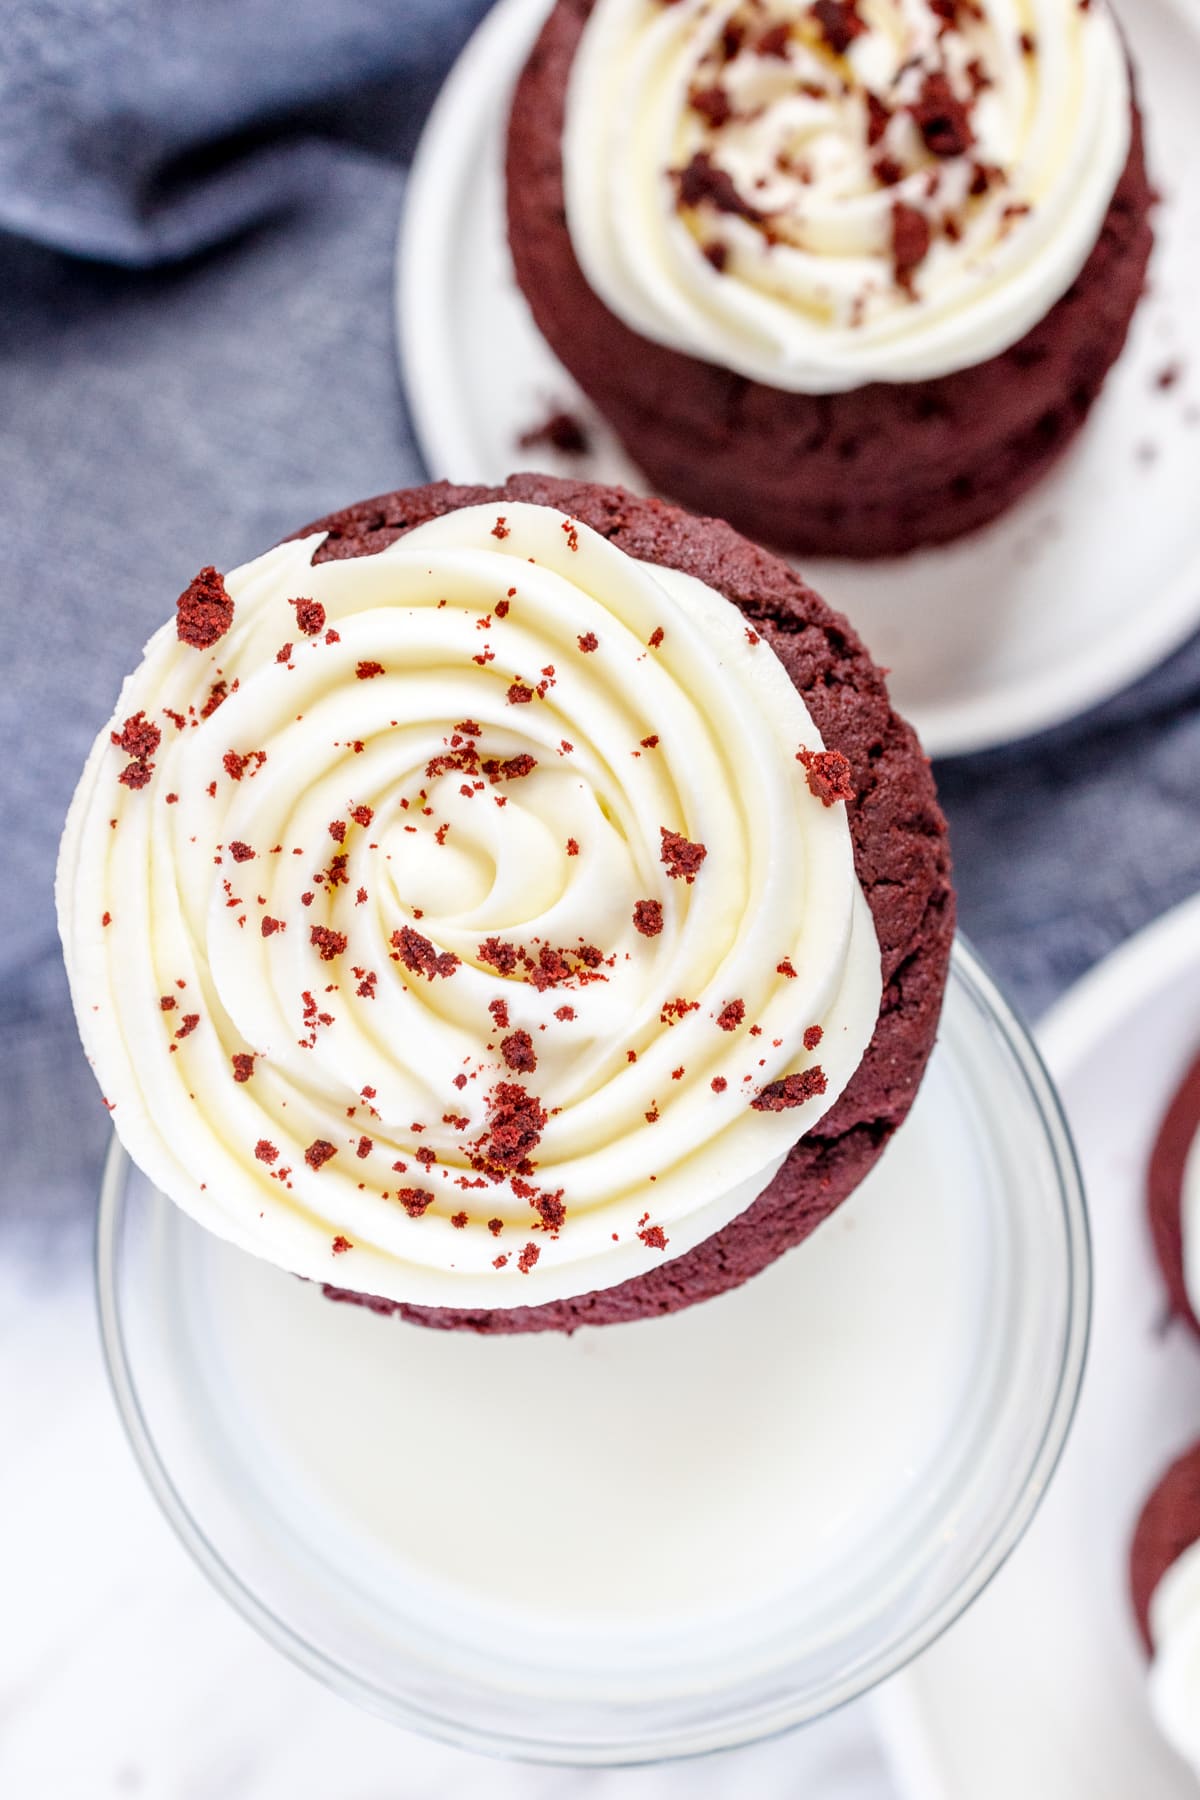 Top view of a Red Velvet Cookie with Cream Cheese Frosting balancing on the rim of a glass filled with milk.